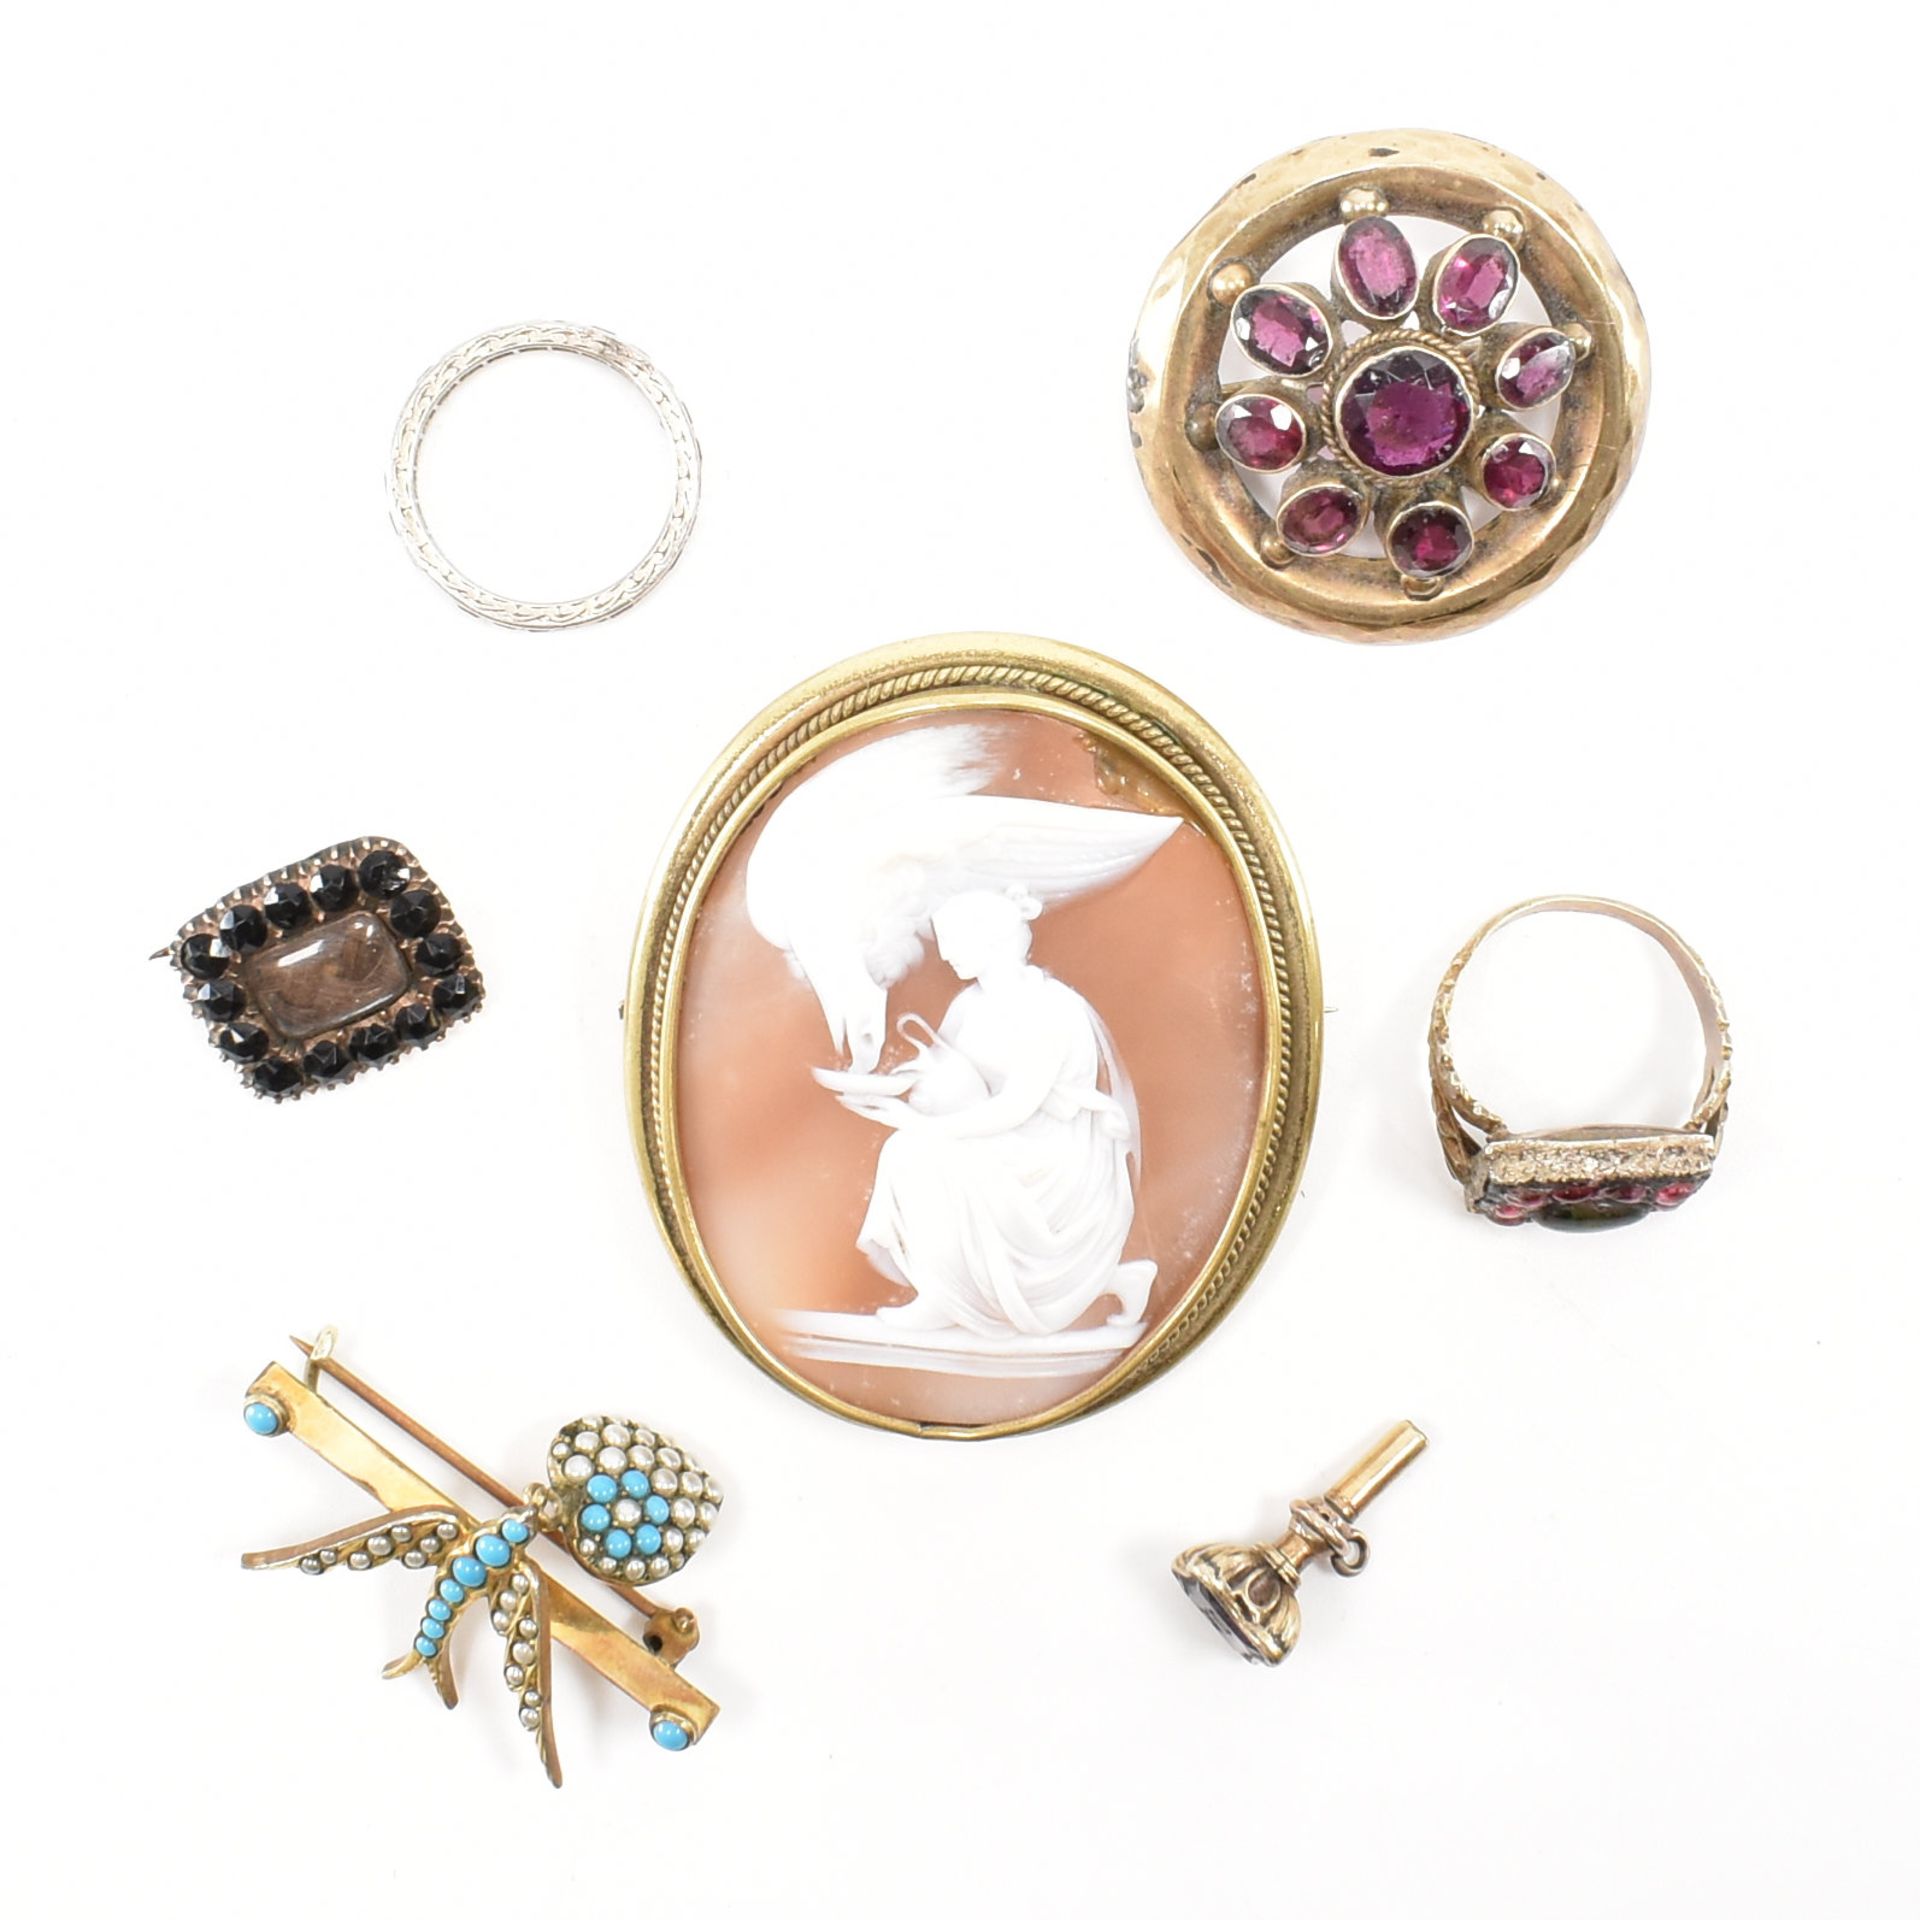 ASSORTMENT OF ANTIQUE JEWELLERY - VICTORIAN & LATER